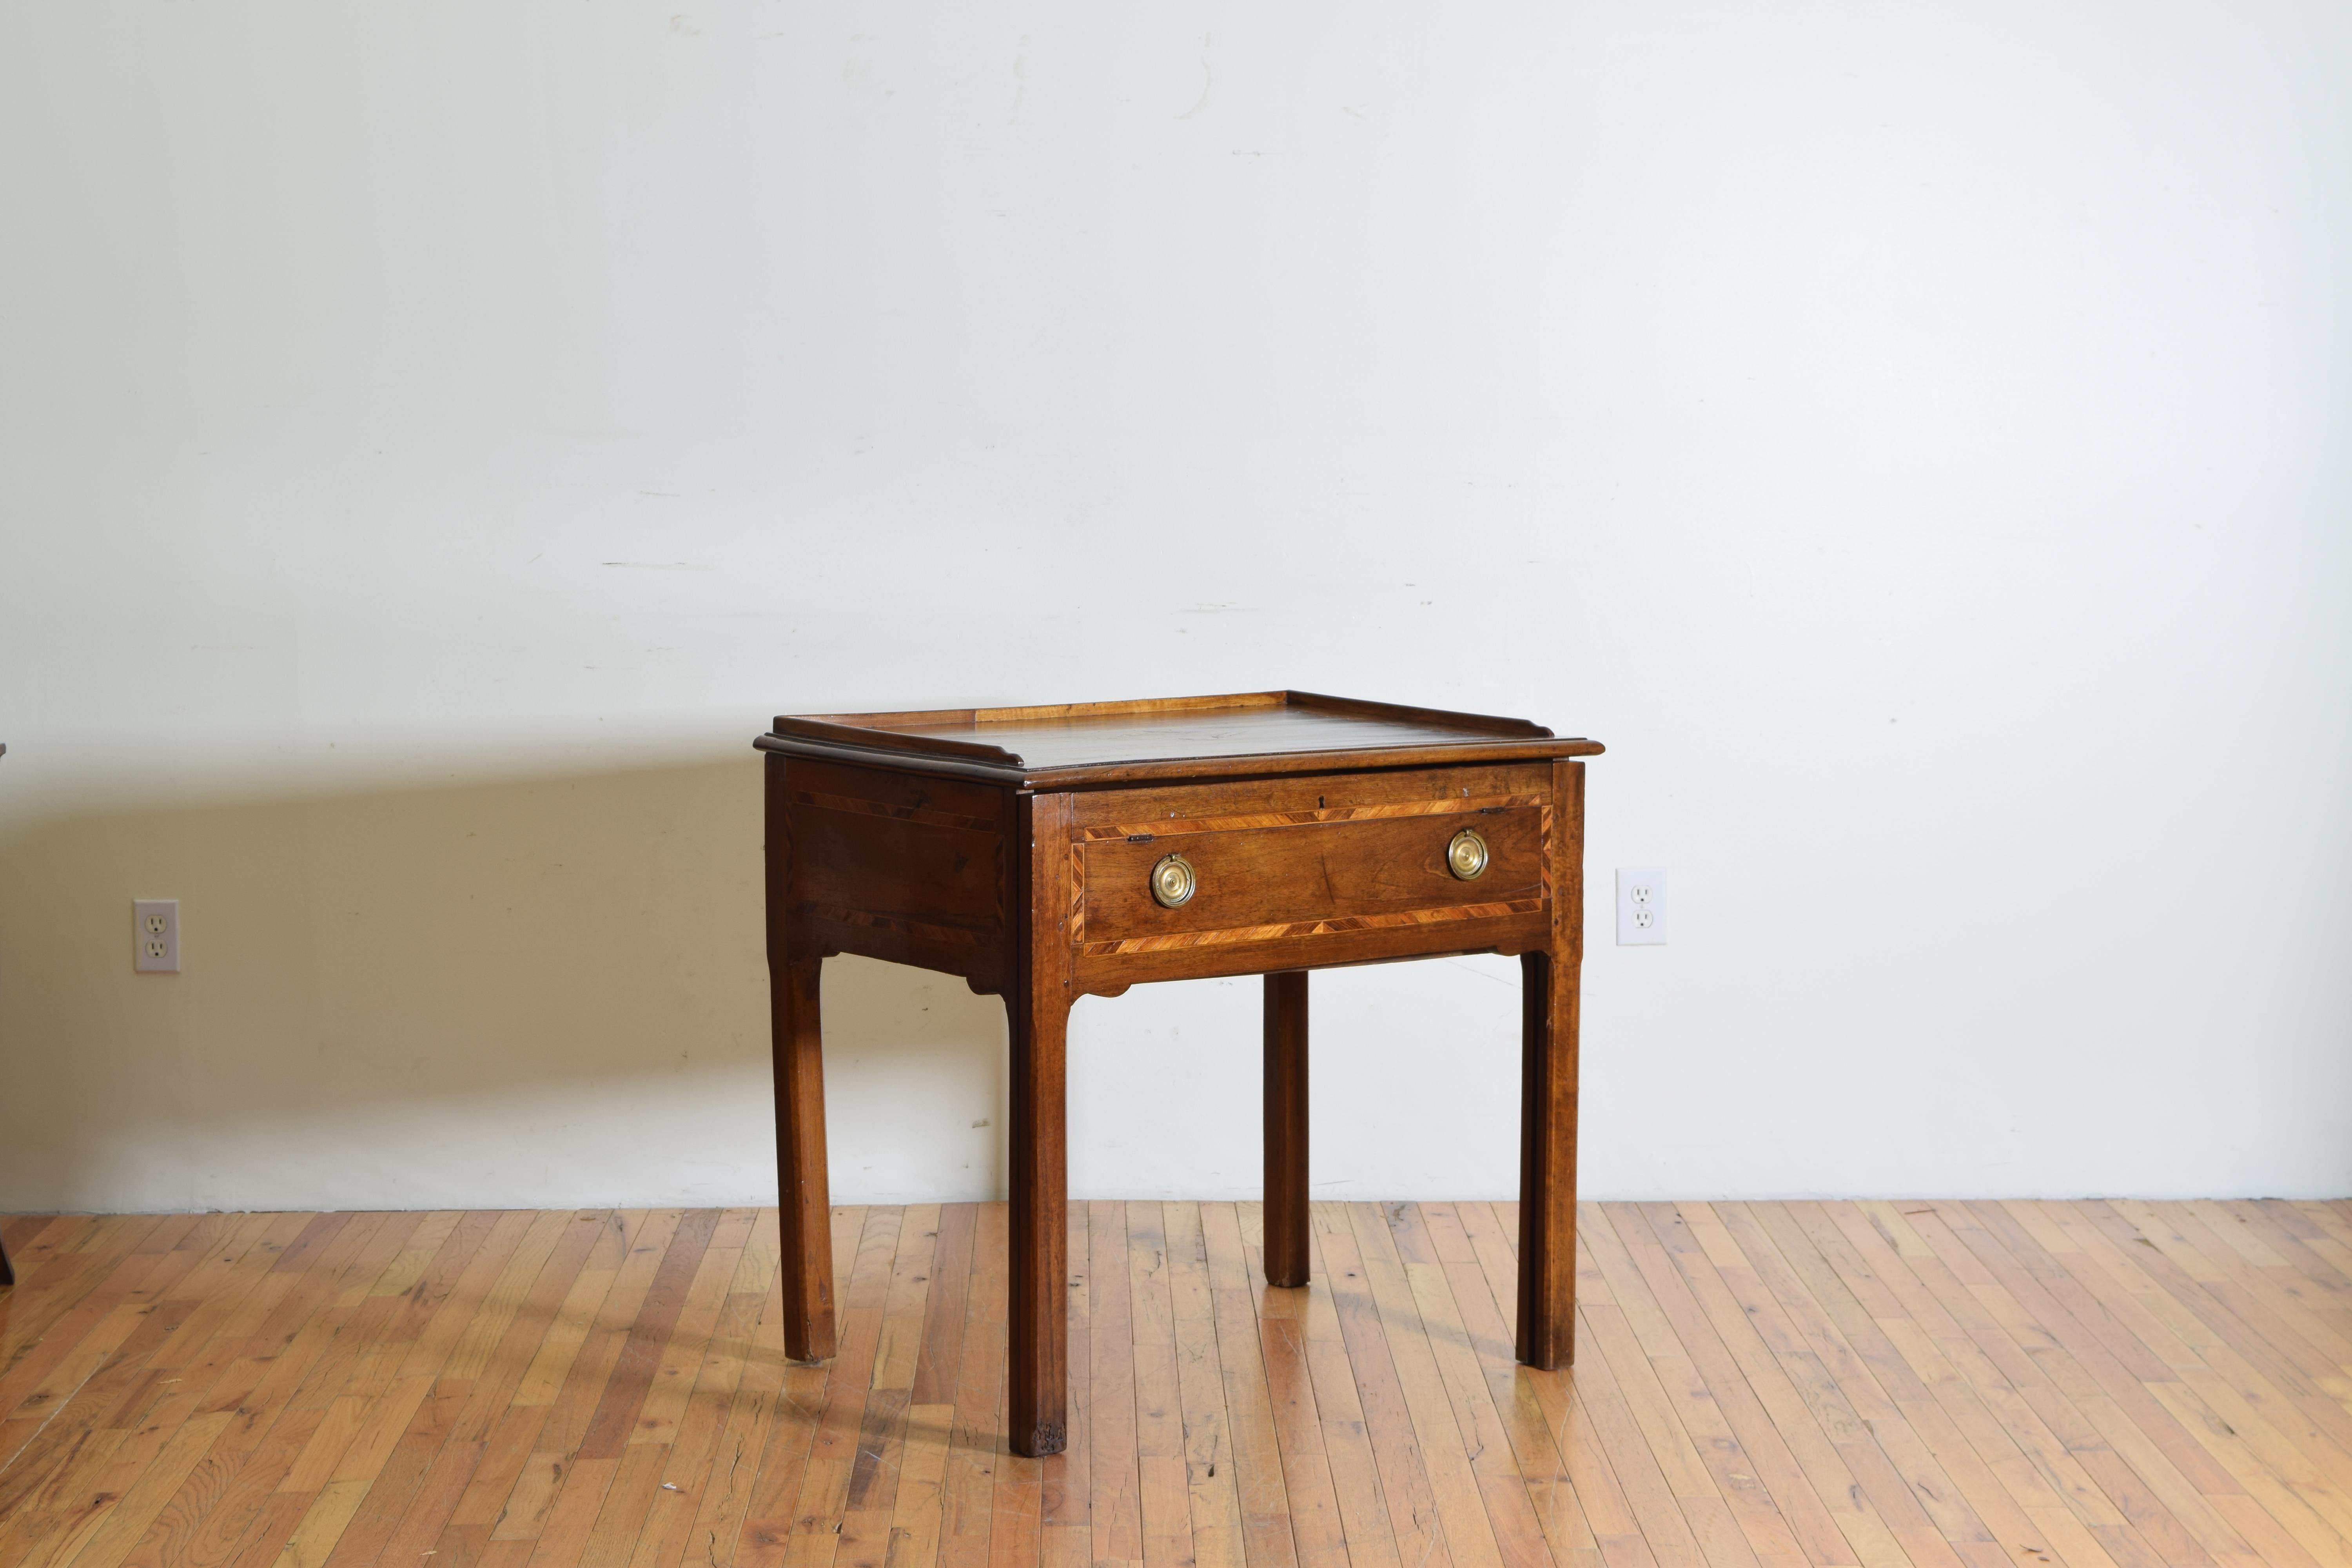 This desk has a line inlaid and central medallion inlaid rectangular top with a gallery edge, the case below sliding forward on joining front legs and the inner section having a sliding top and inner drawers and compartments, the front having false